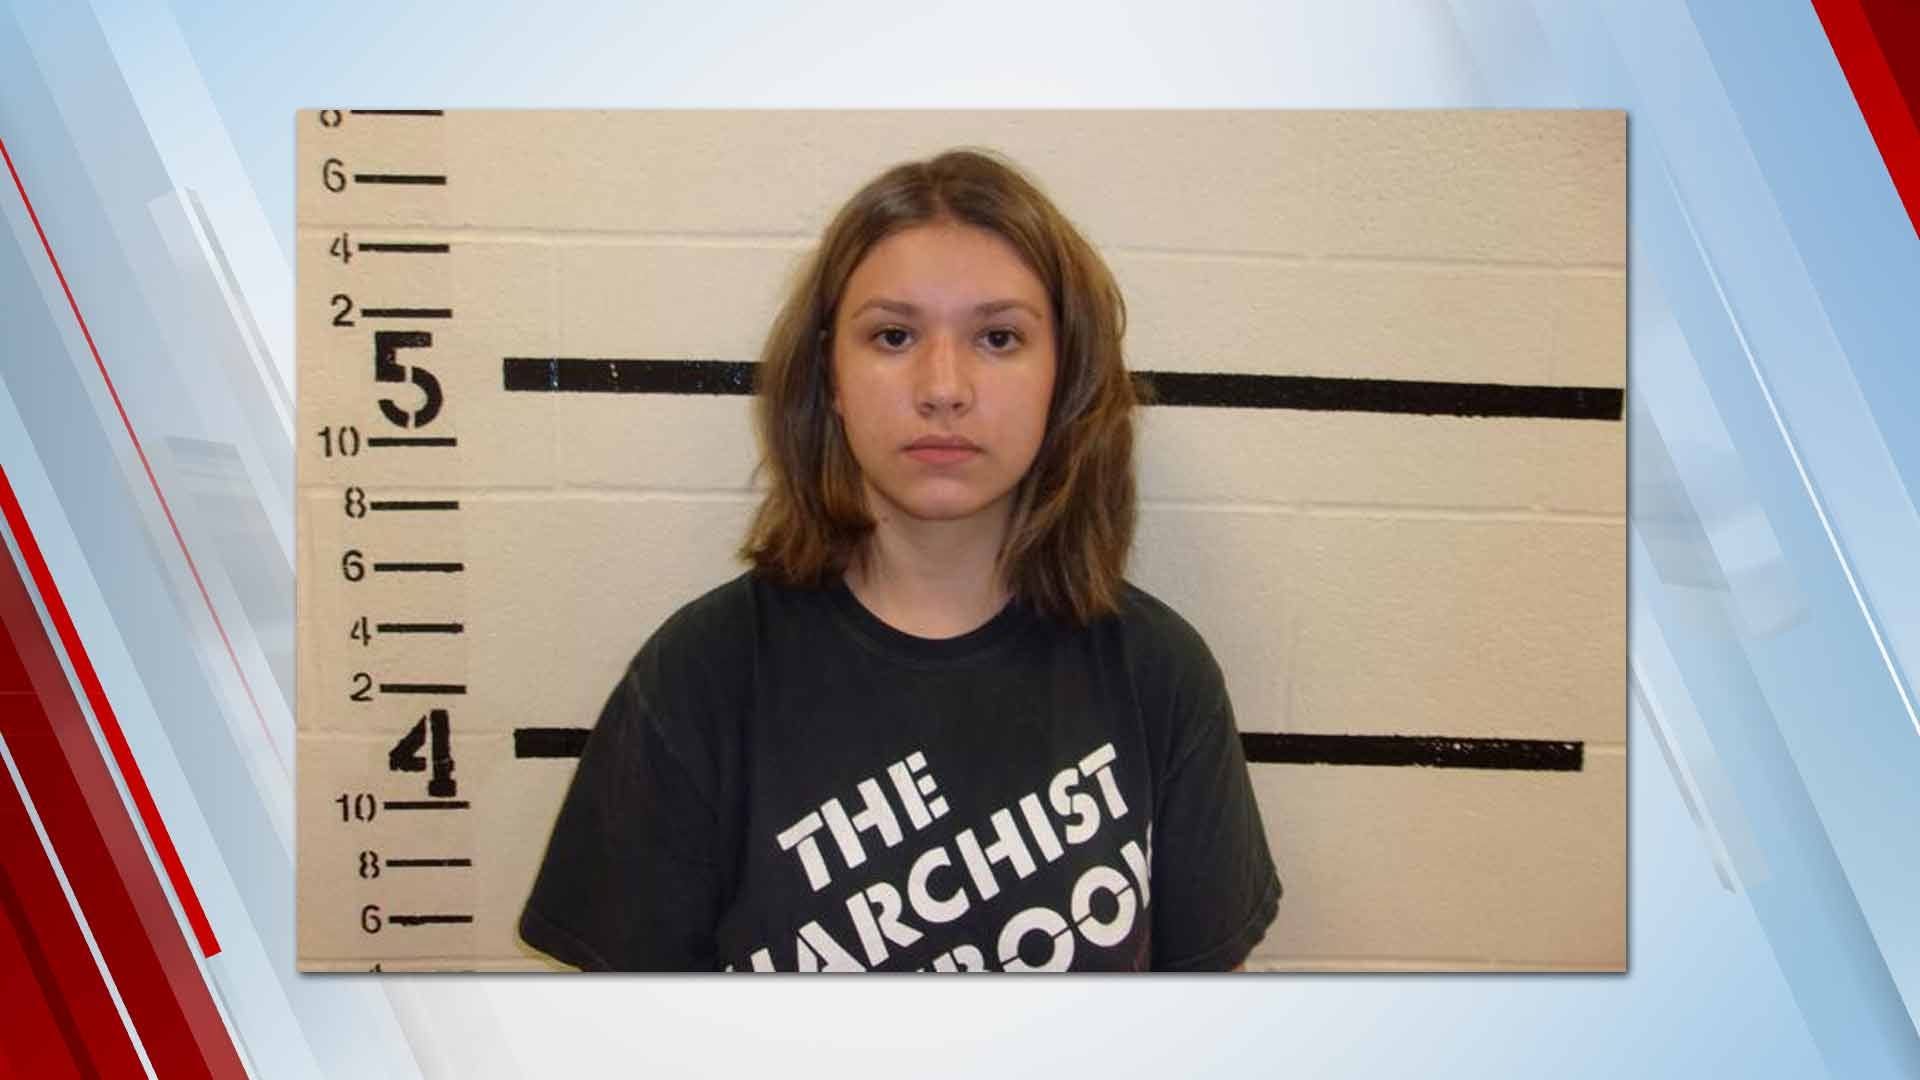 Prosecutor Upgrades Charge Against McAlester Woman In School Shooting Threat Investigation